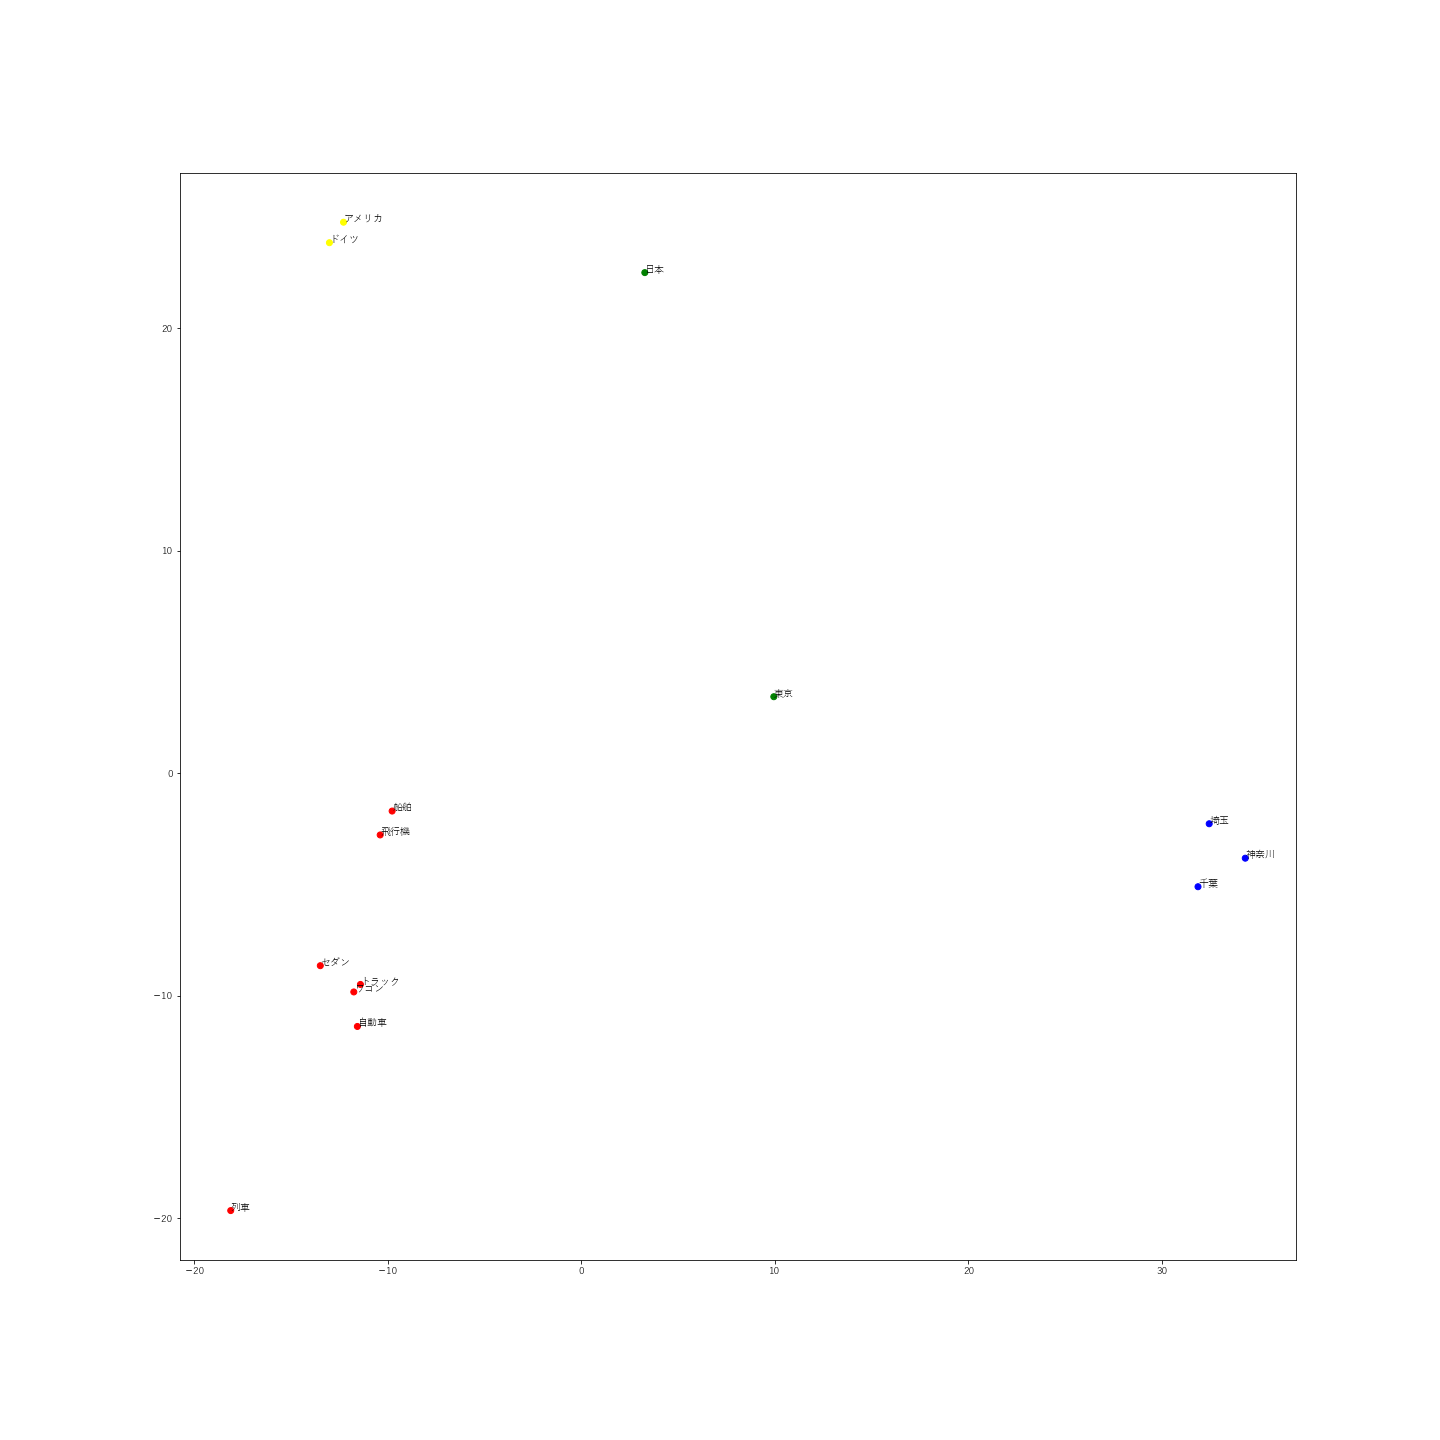 word_clustering_scatter2.png